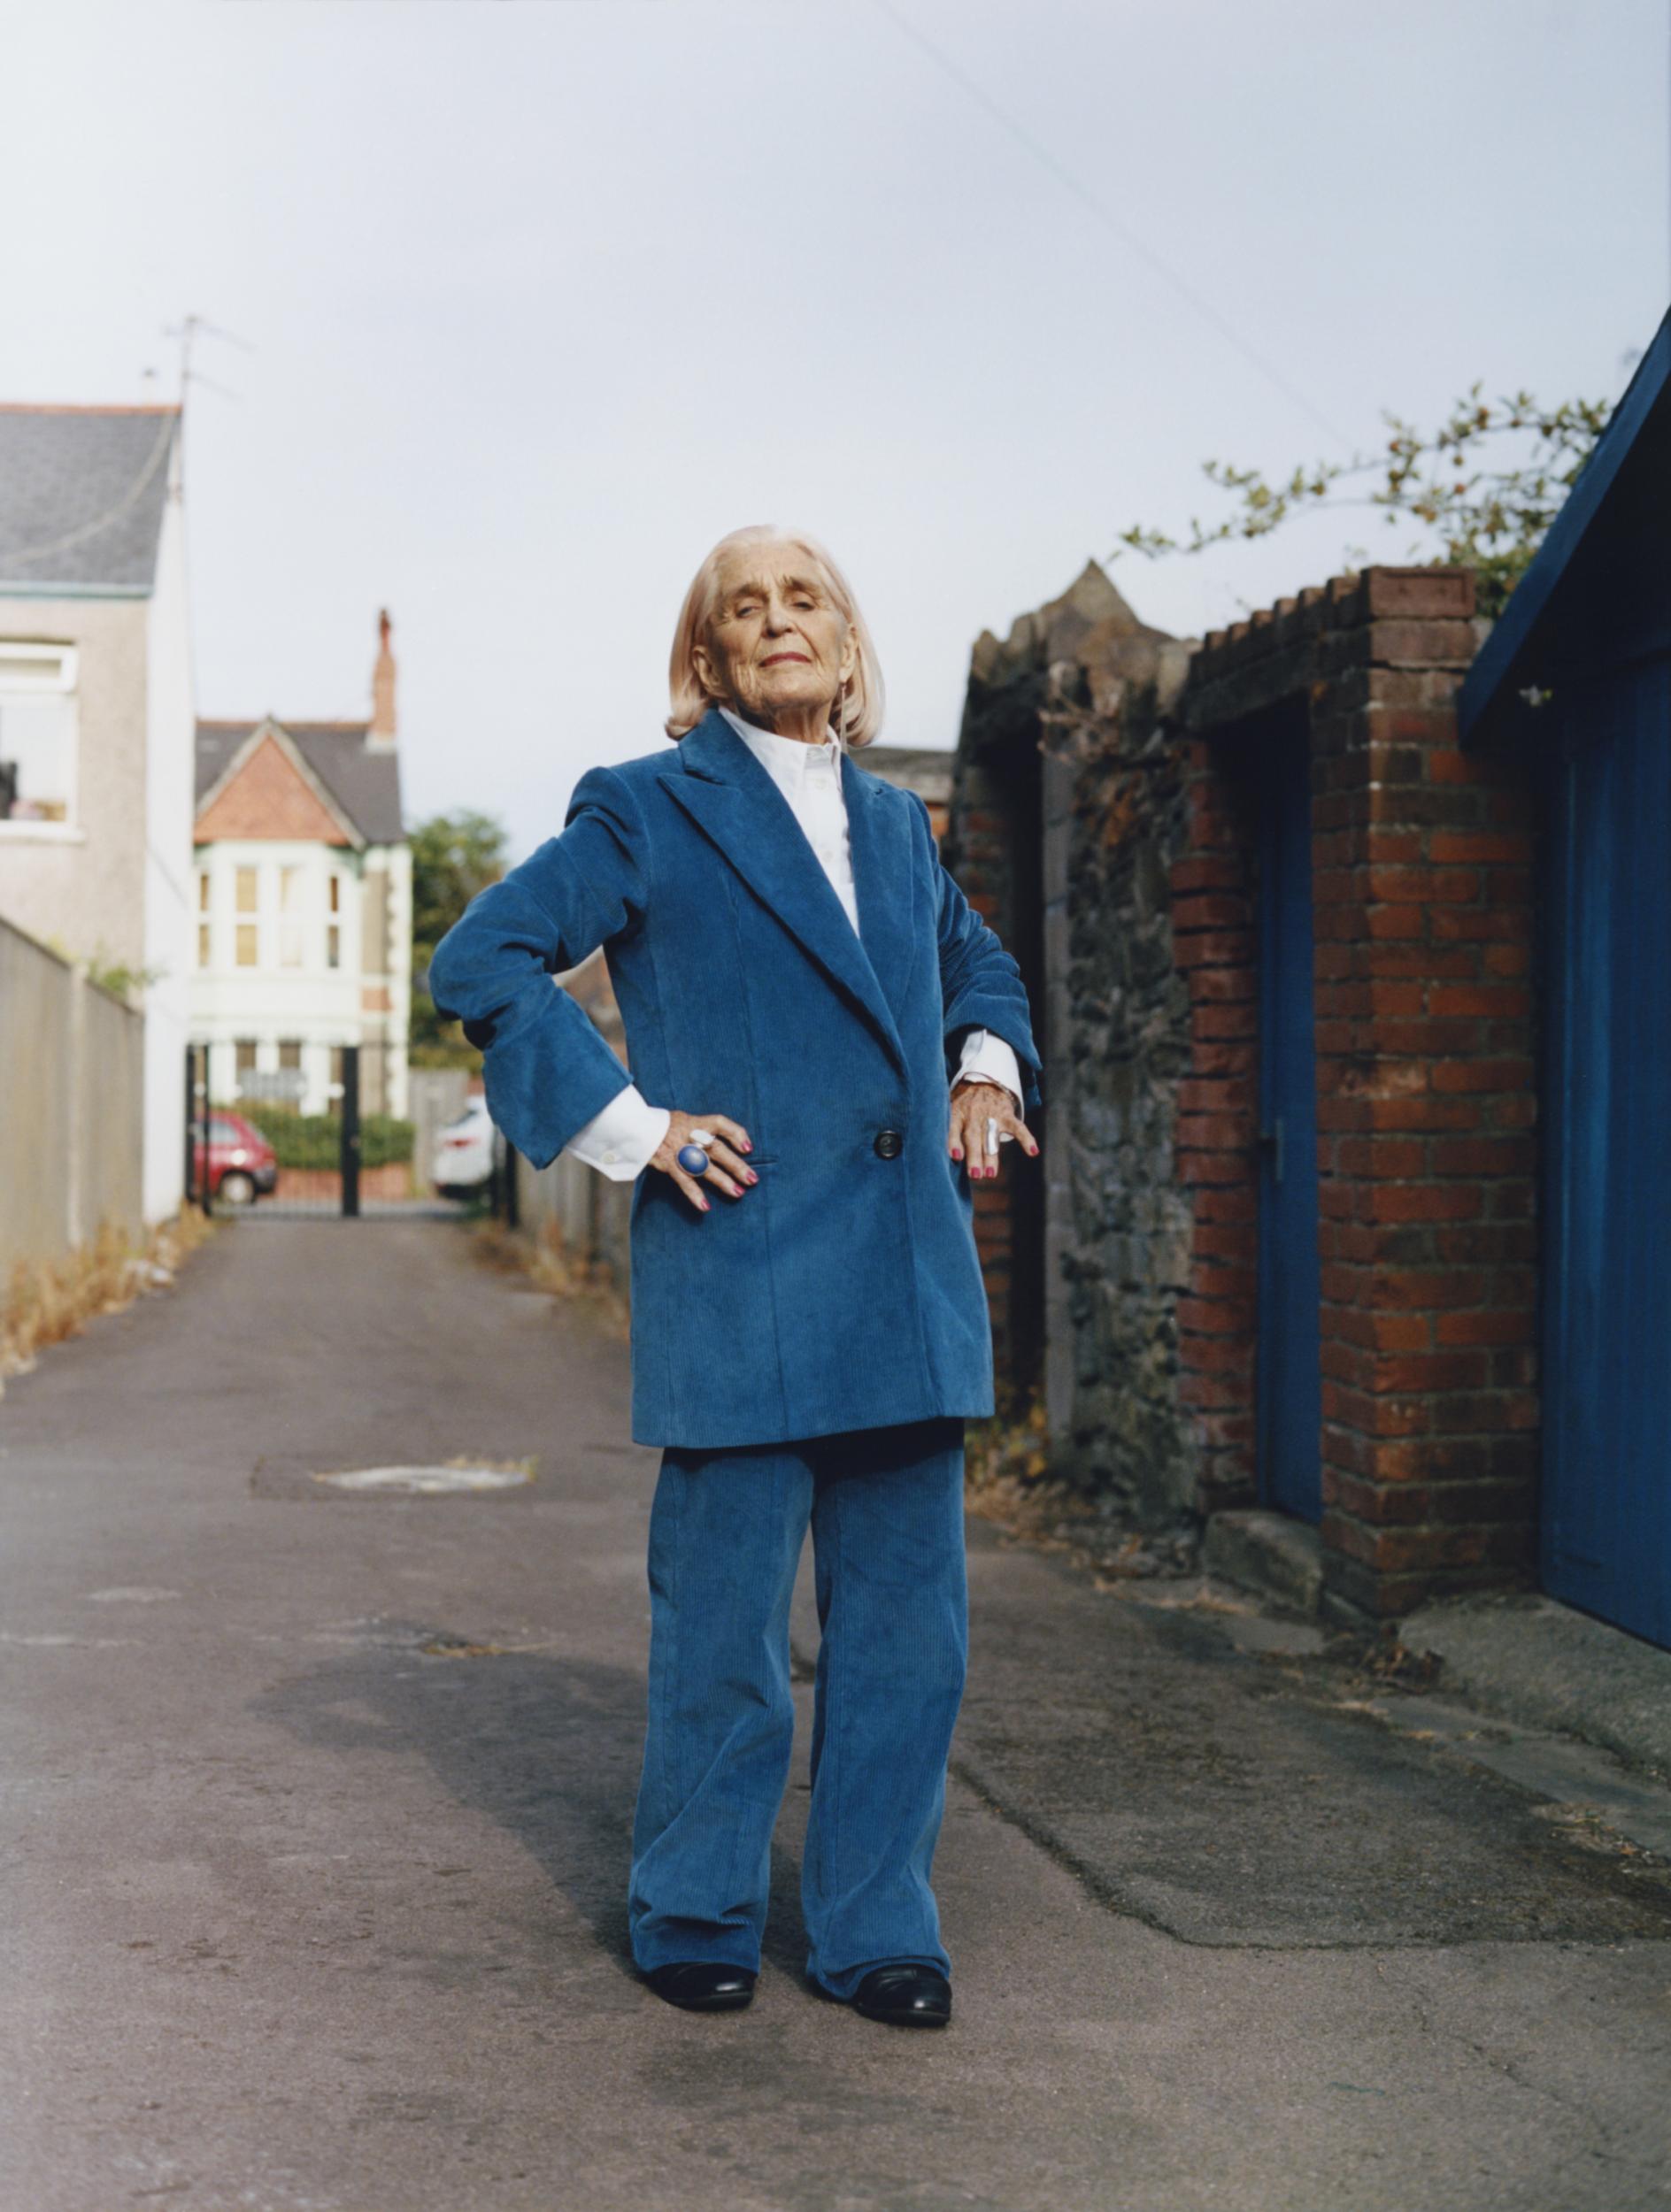 Older people are the stars of Helmut Lang's new campaign - HIGHXTAR.